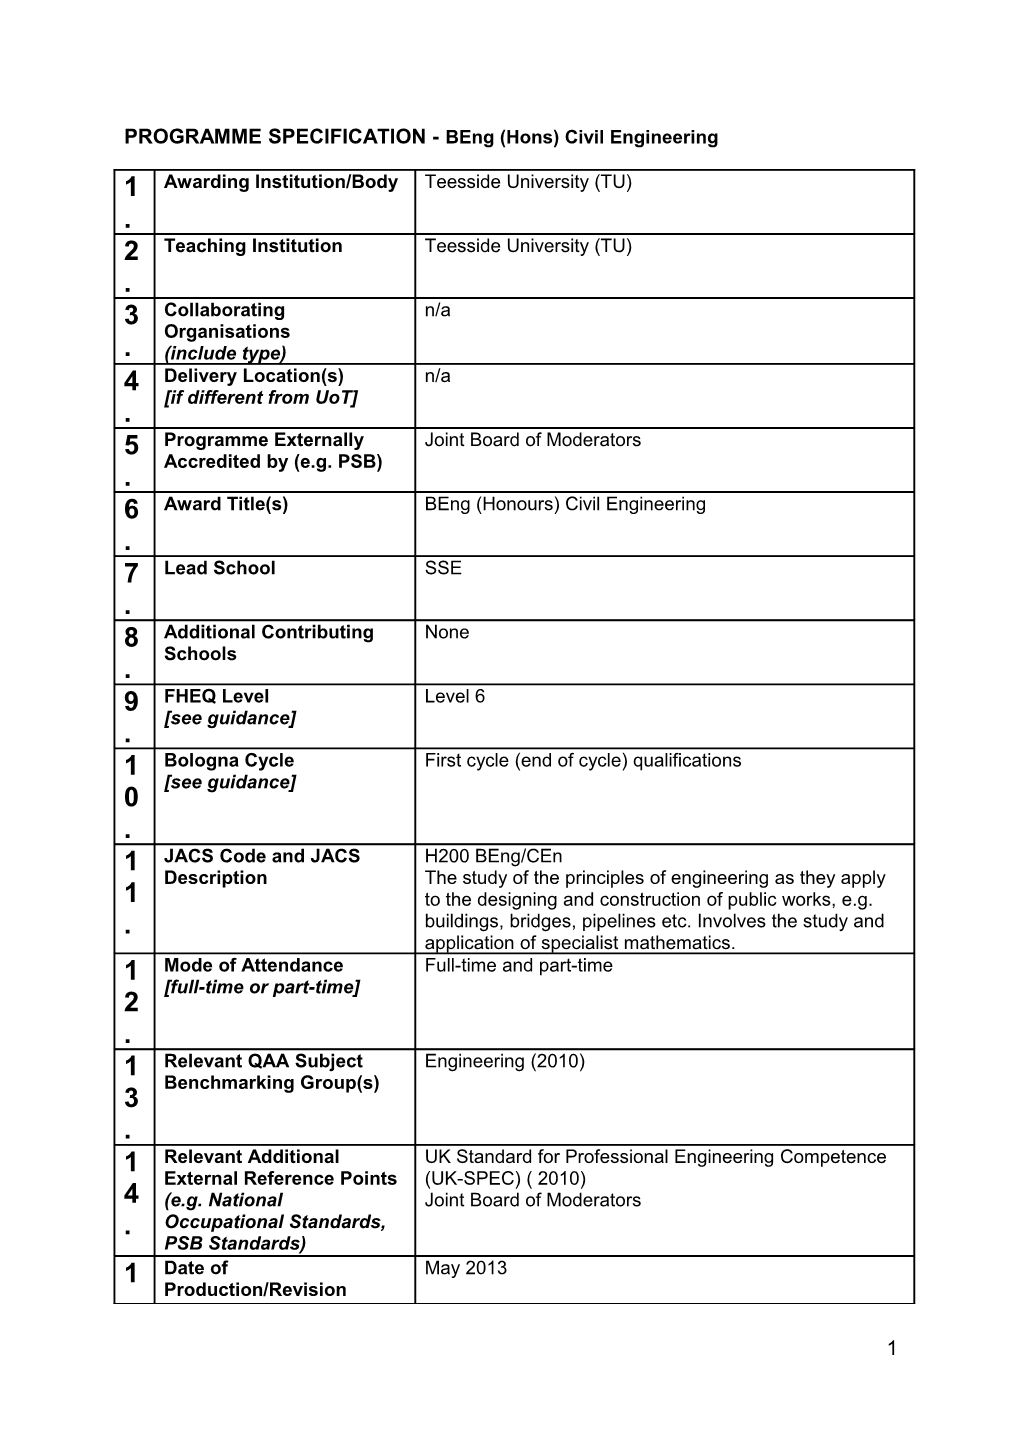 PROGRAMME SPECIFICATION - Beng (Hons) Civil Engineering